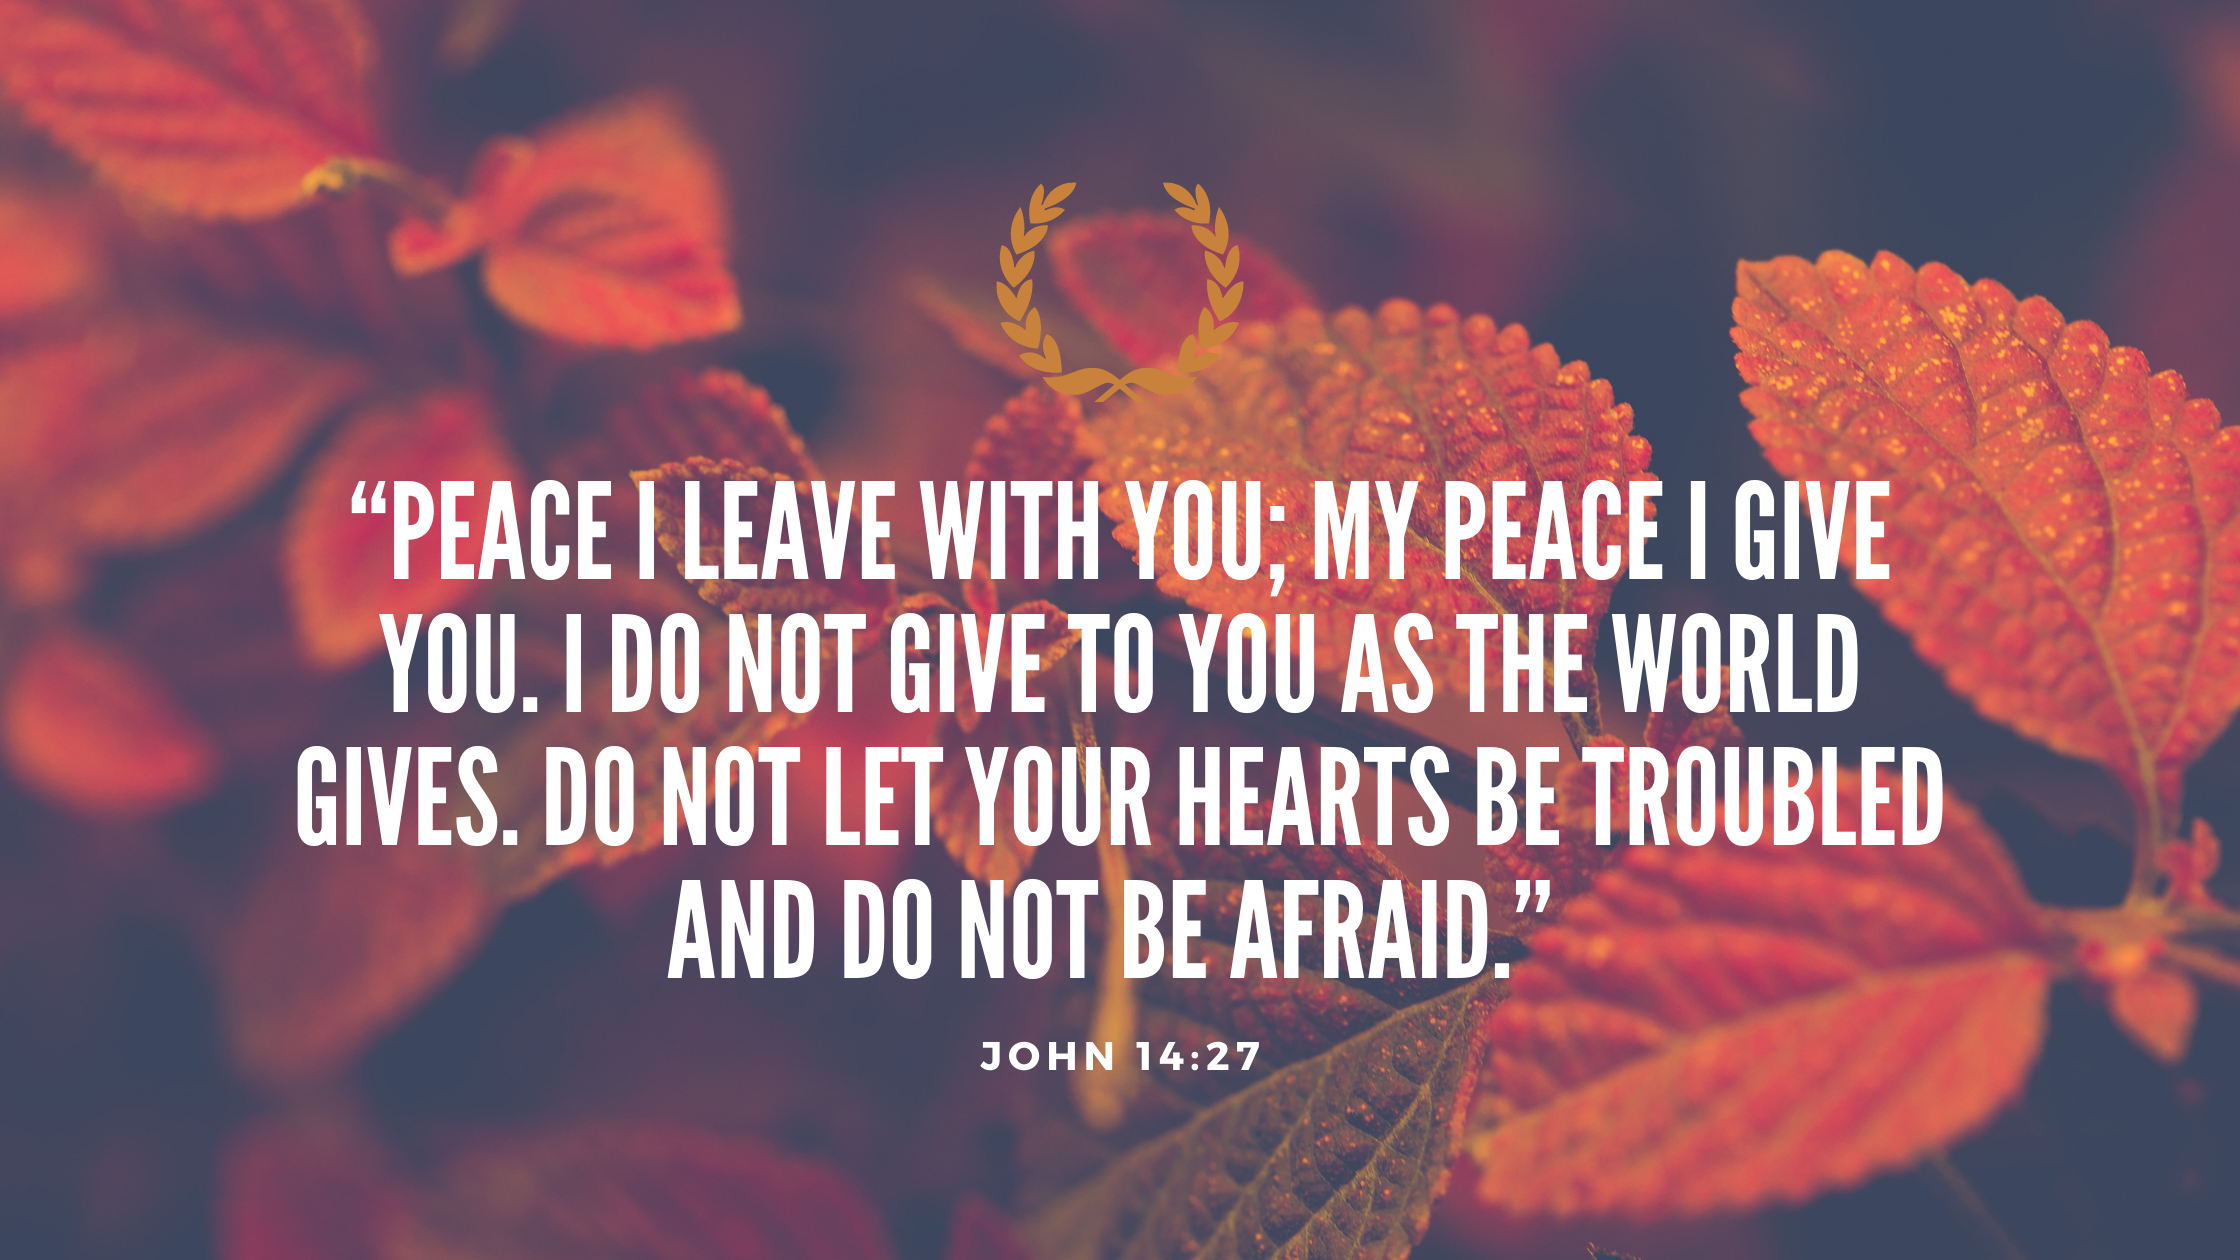 “Peace I leave with you; my peace I give you. I do not give to you as the world gives. Do not let your hearts be troubled and do not be afraid.” -John